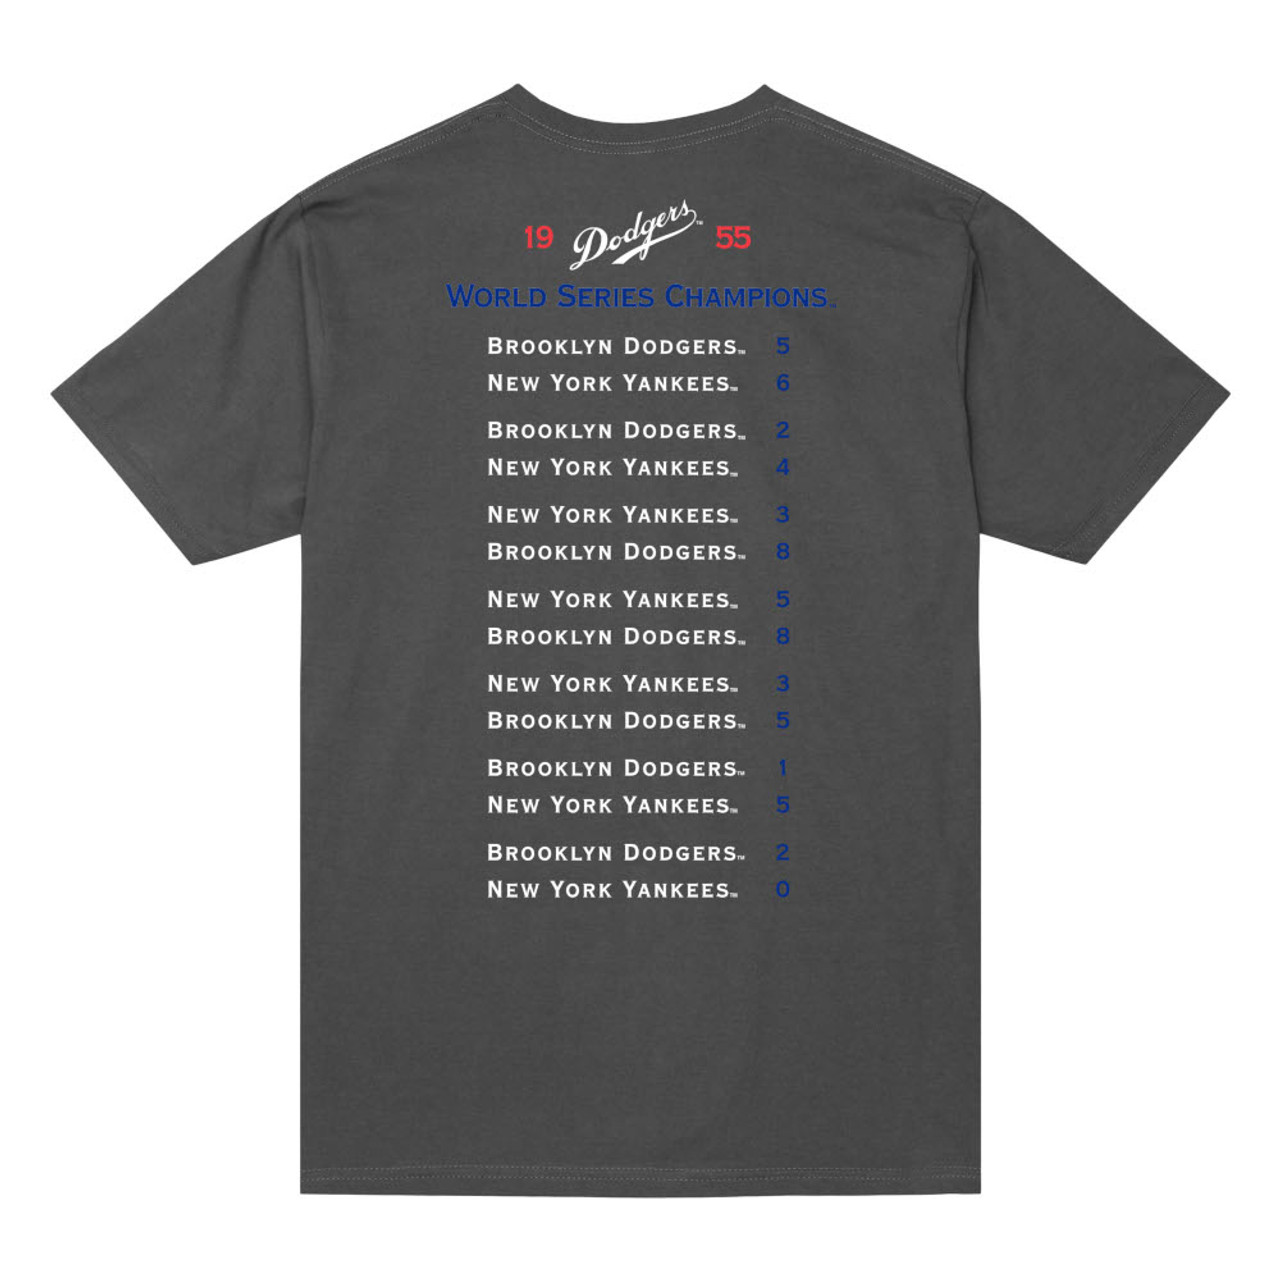 mitchell and ness dodgers t shirt